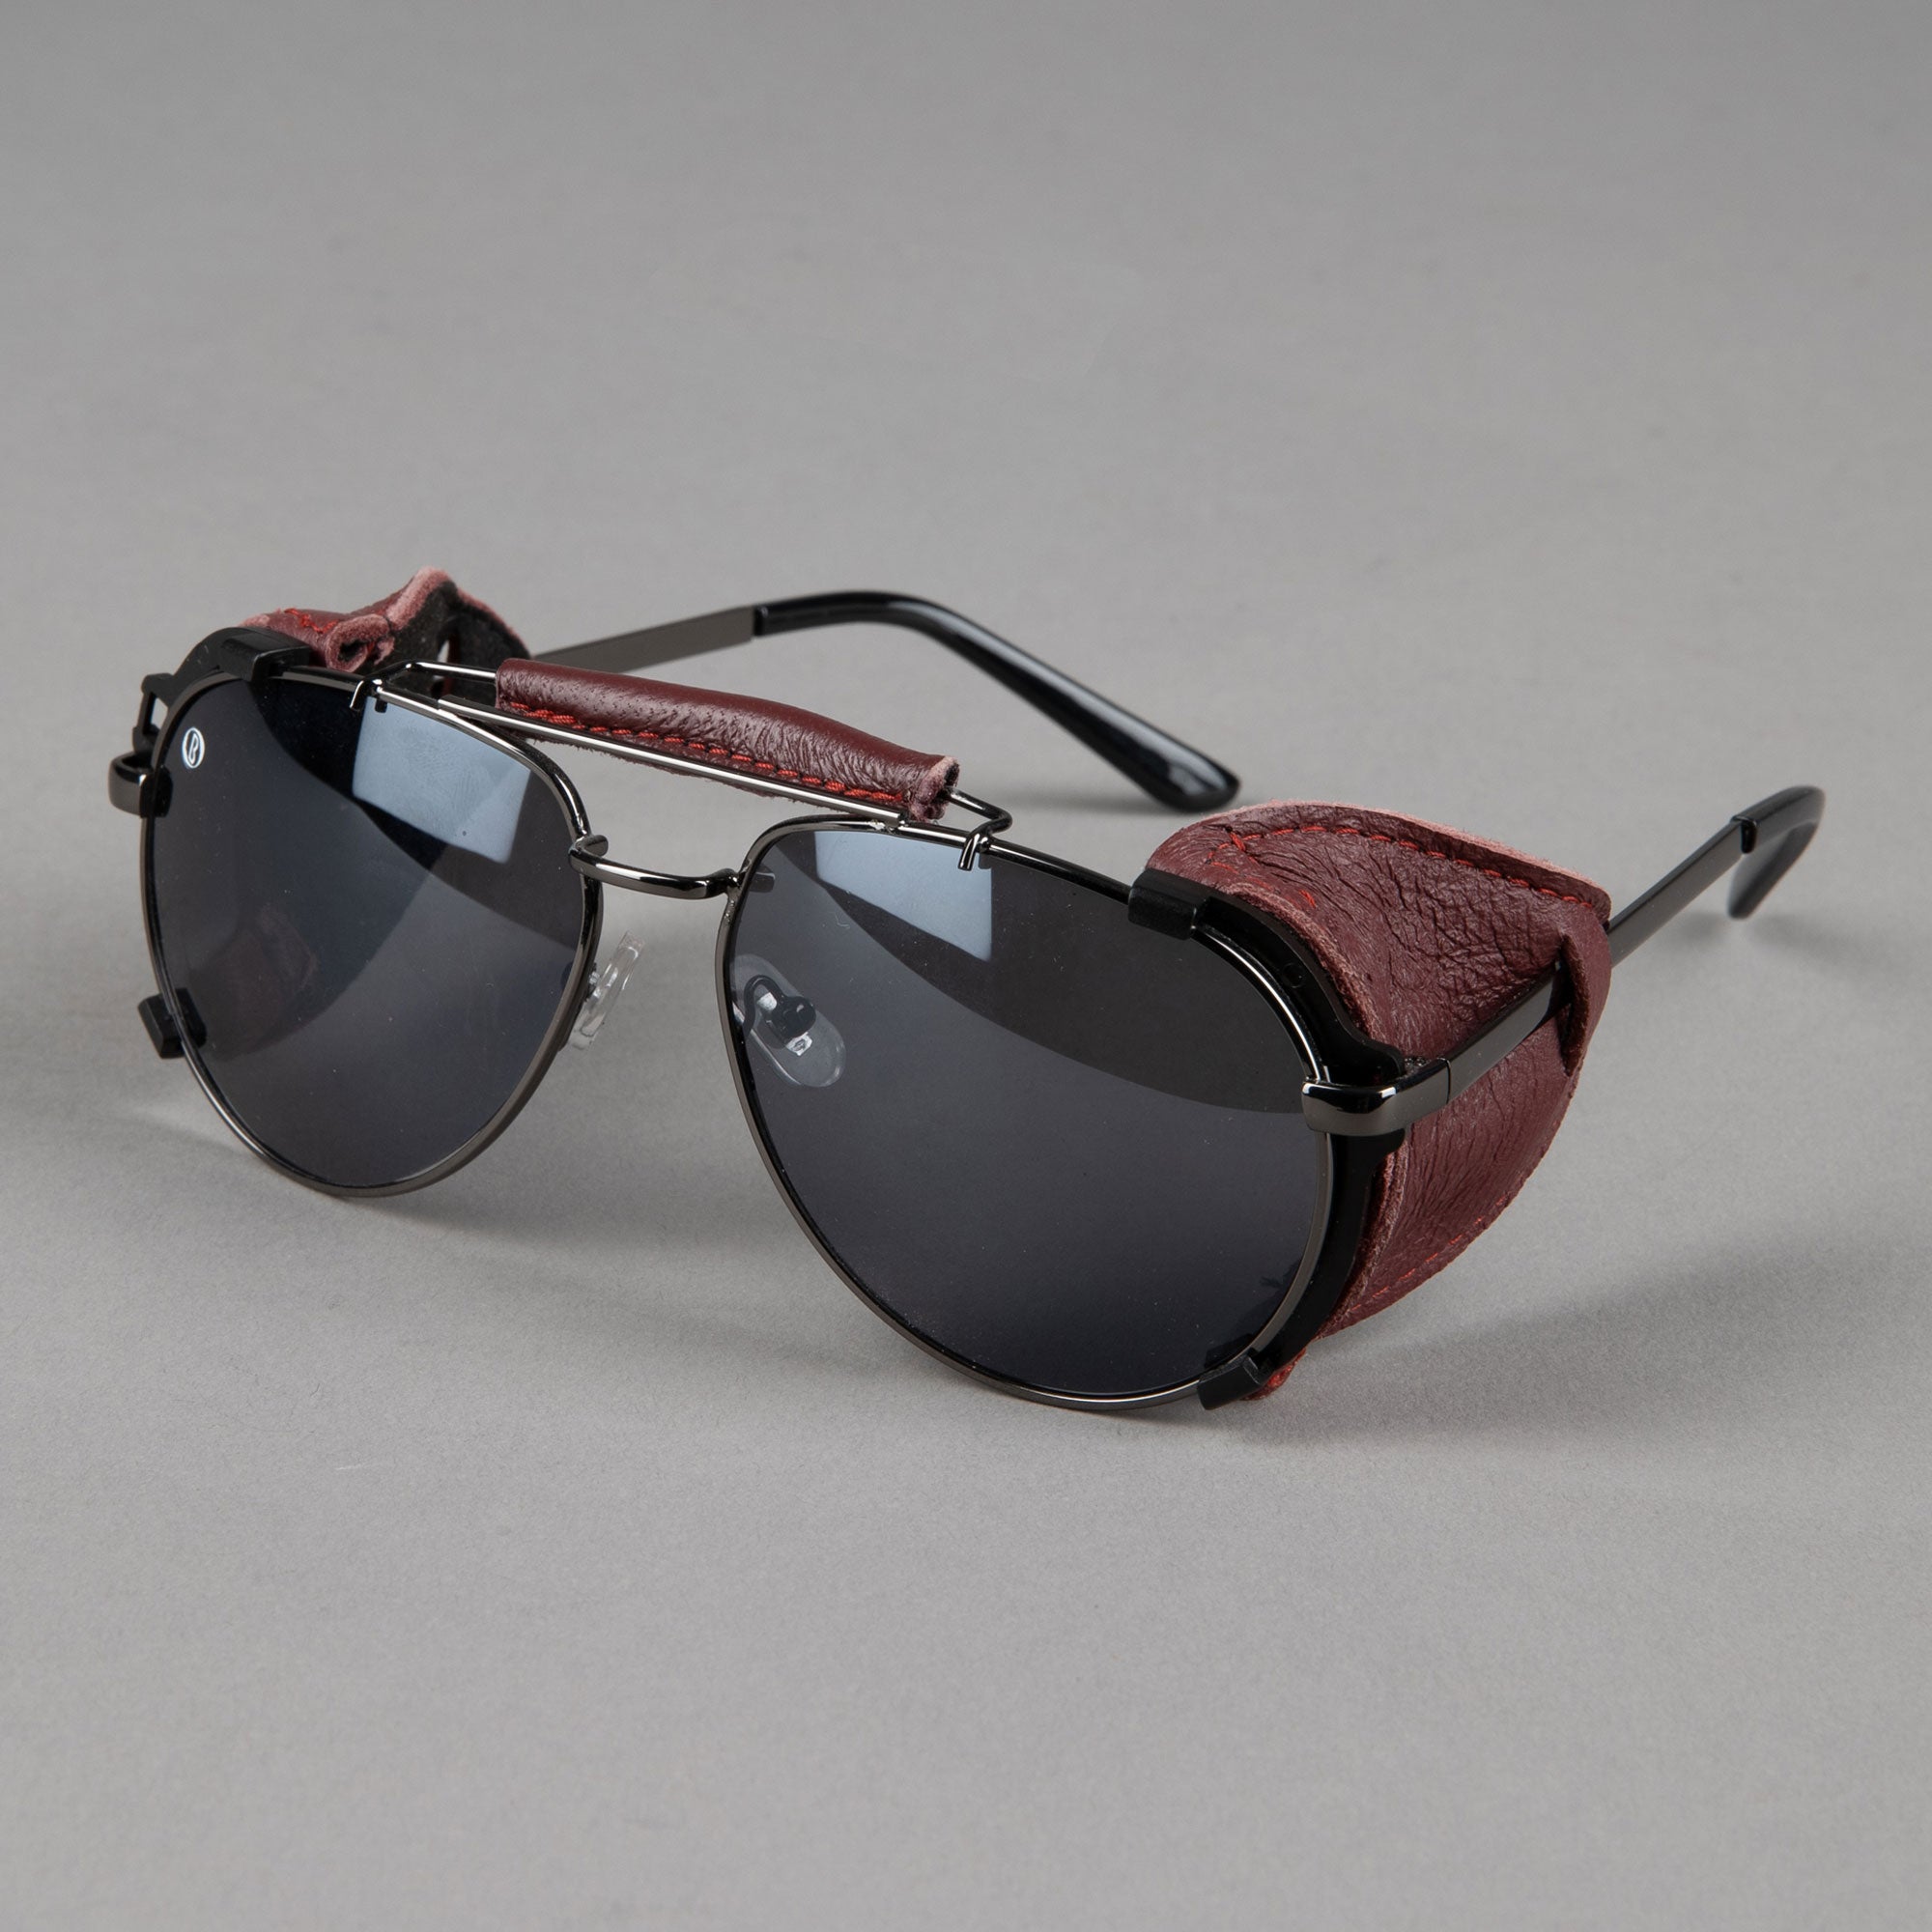 Annapurna Base Brille rot (Rosso Imperiale)